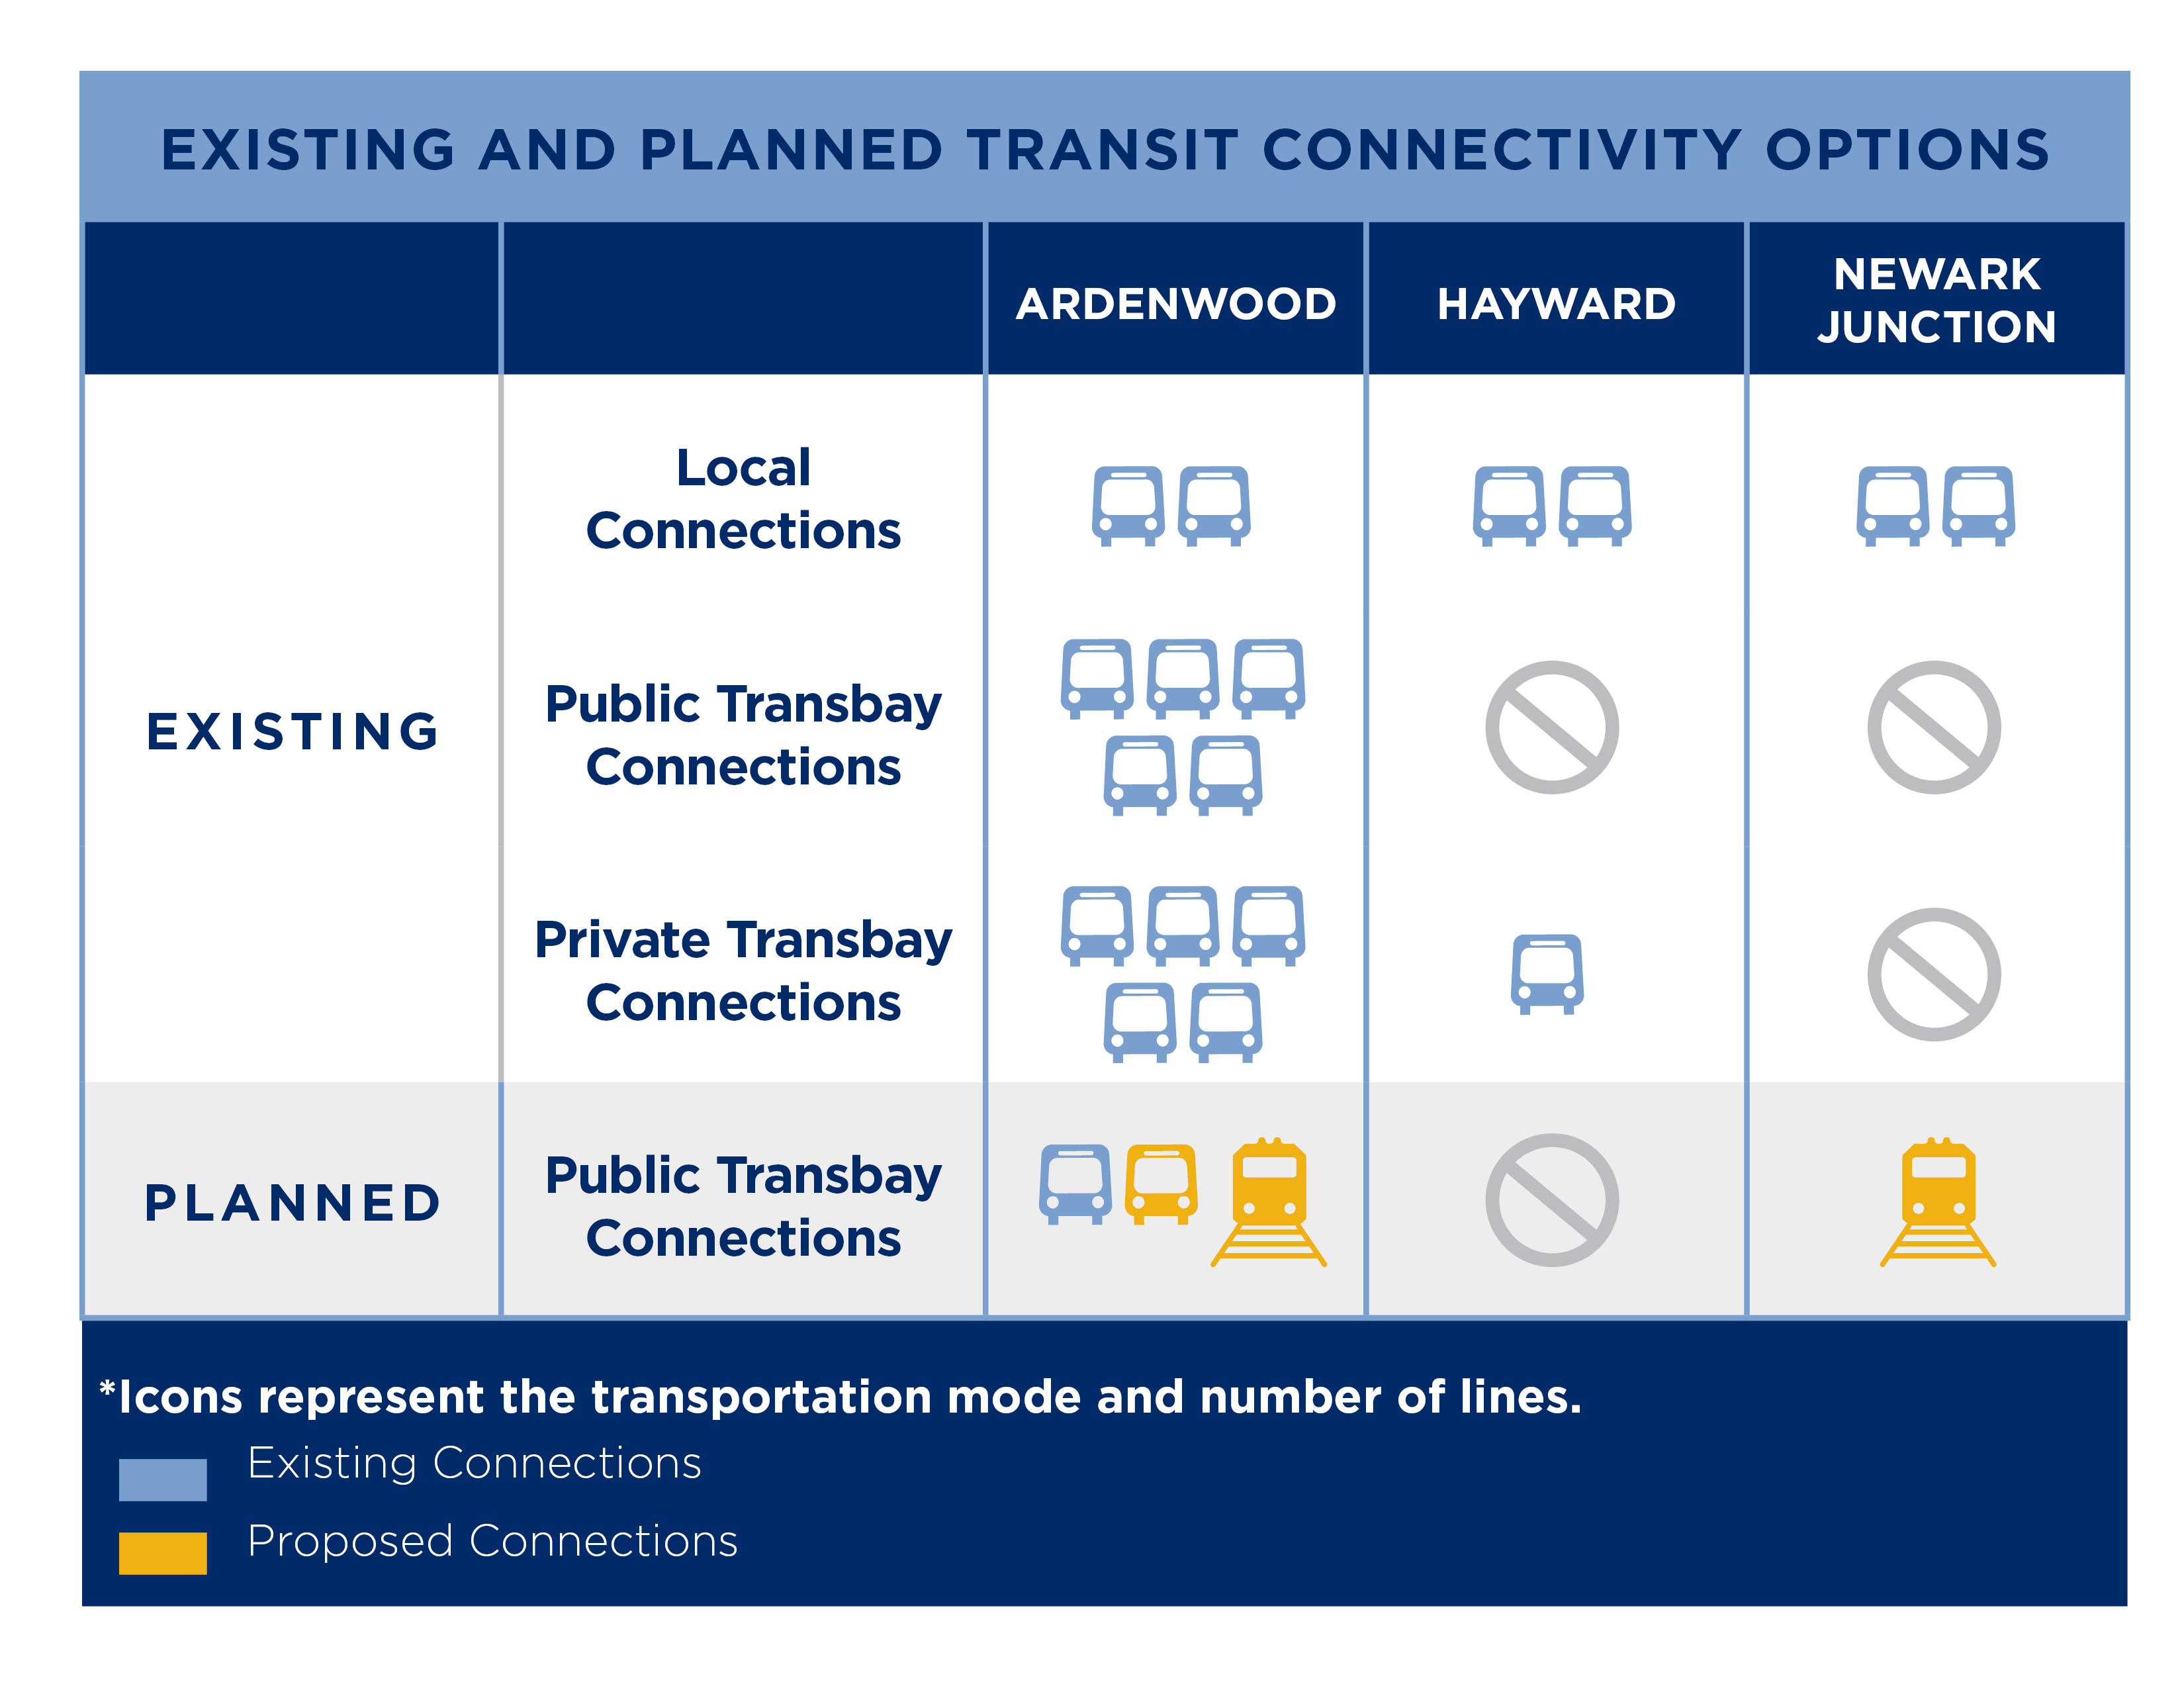 Existing and planned transit connectivity options